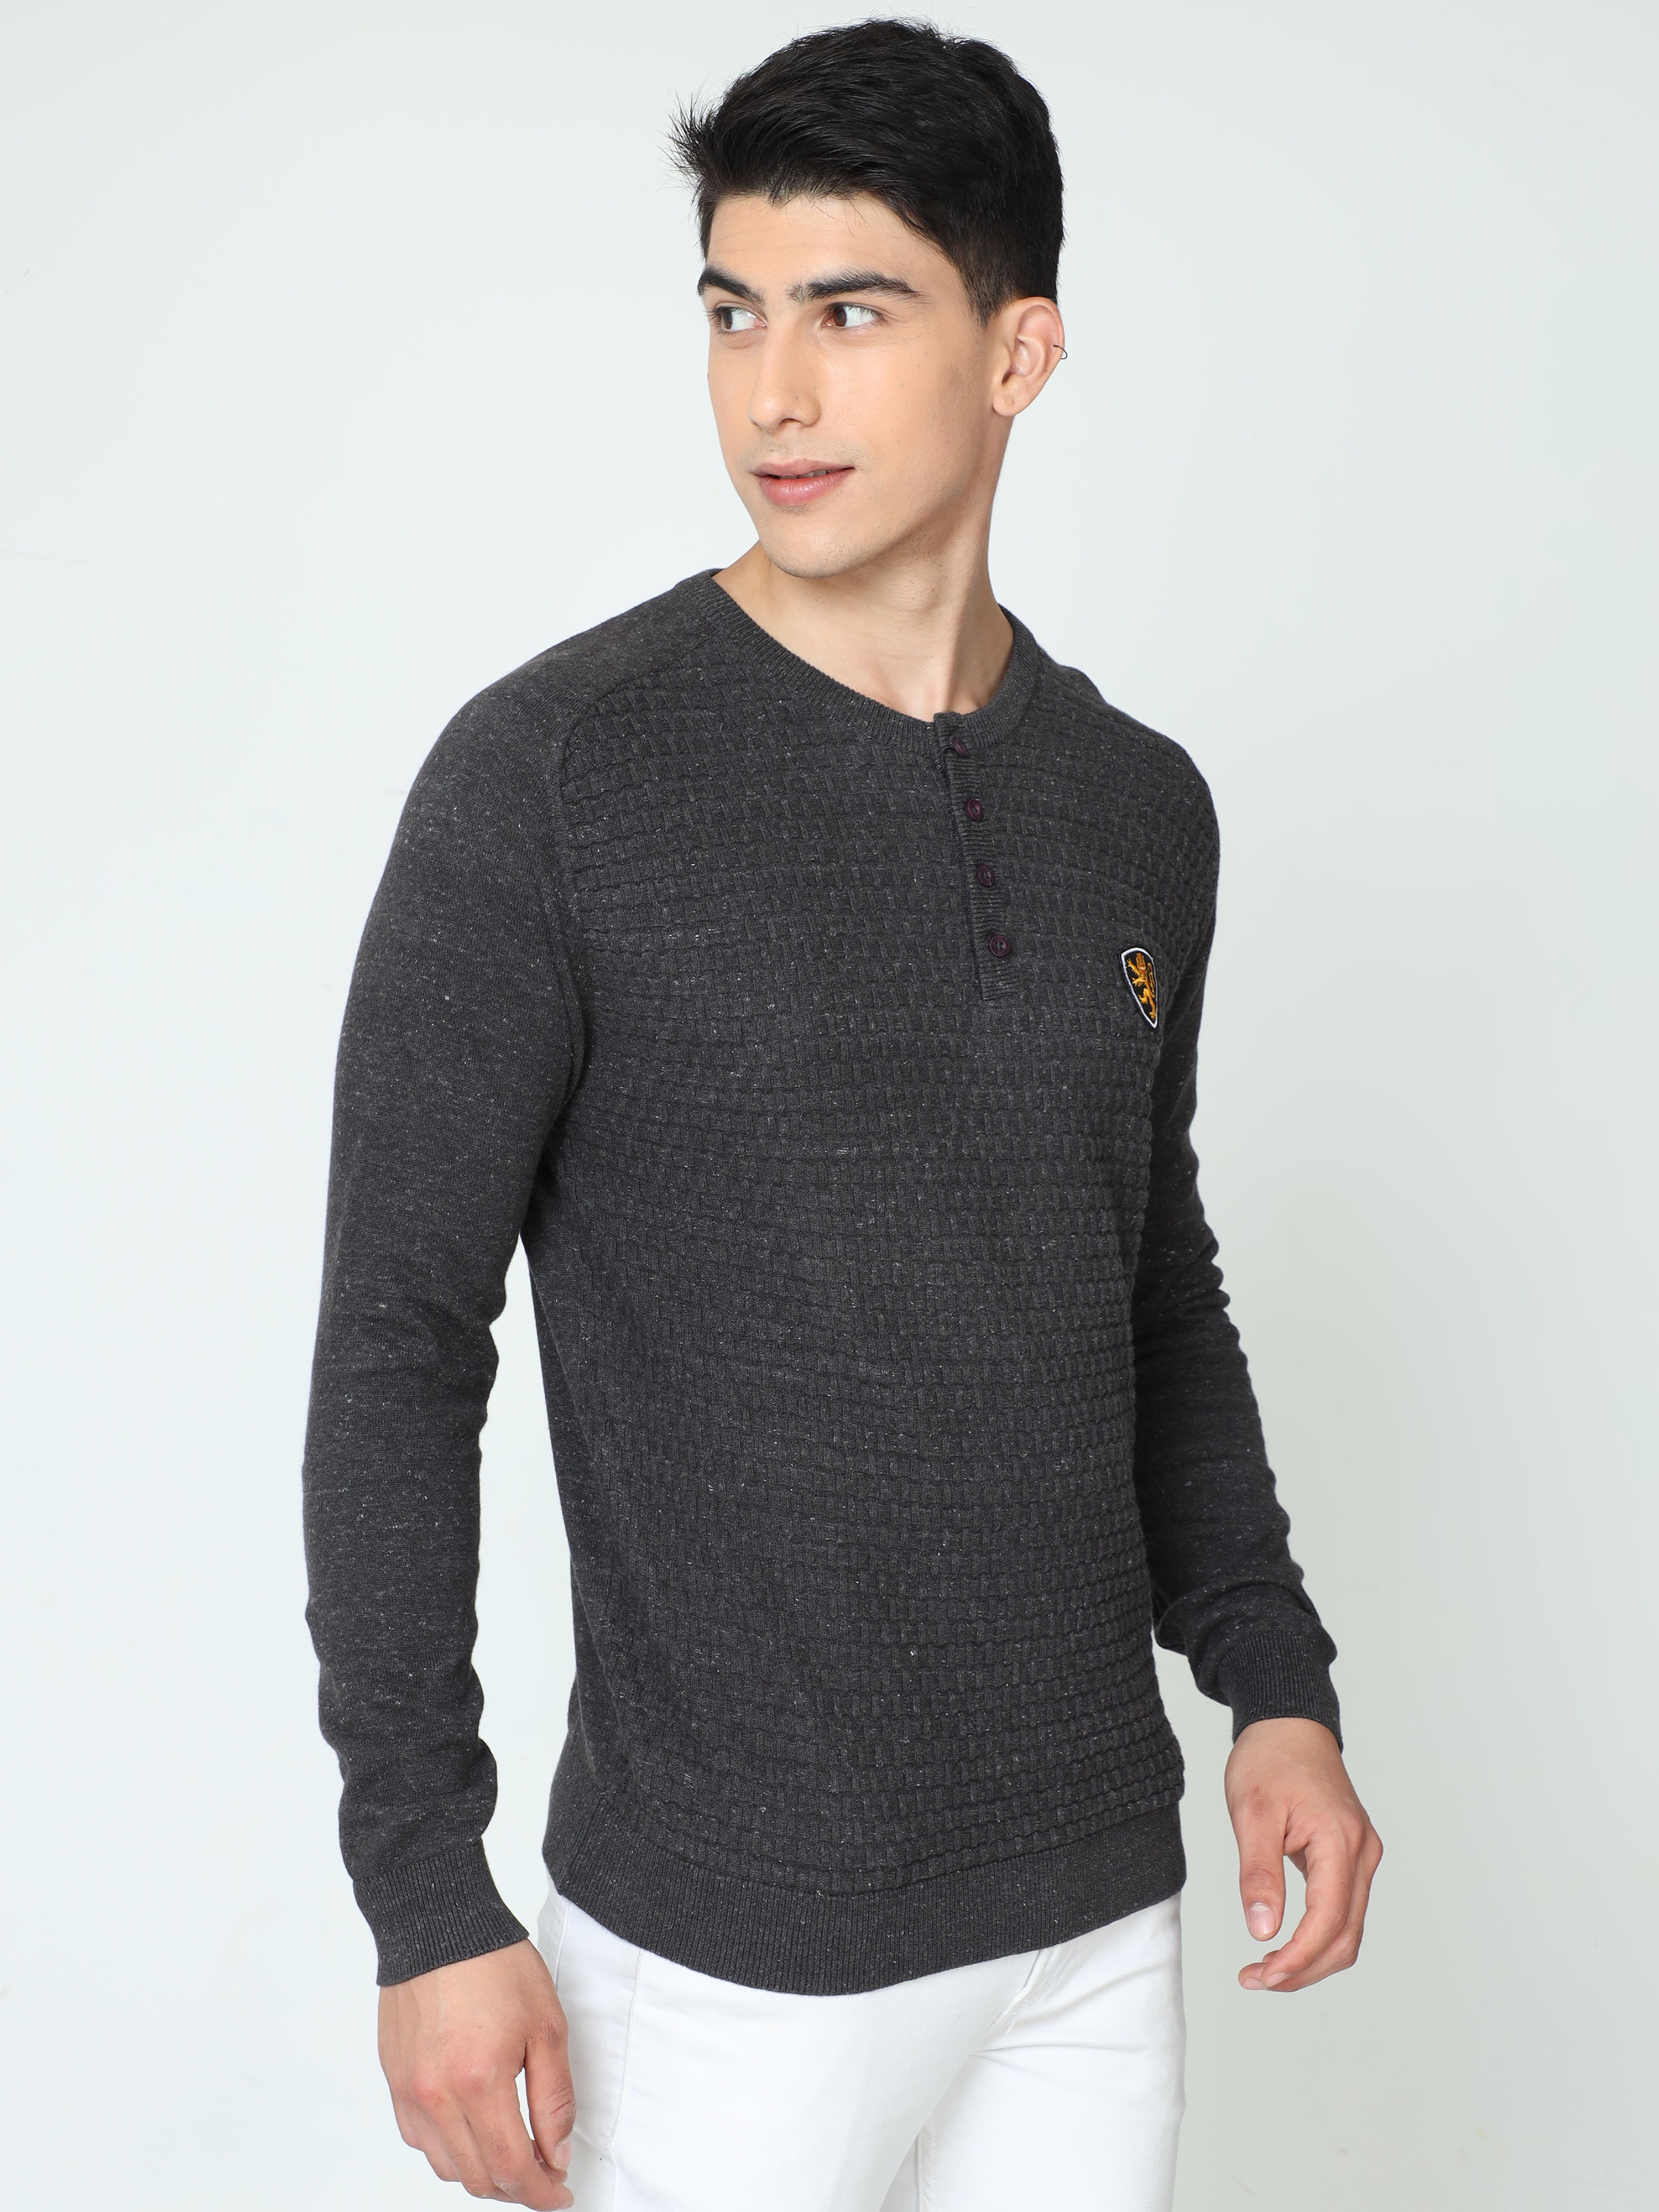 Classic Polo Mens 100% Cotton Black Solid Crew Neck Full Sleeves Slim Fit Sweater |Cp-Swt-01